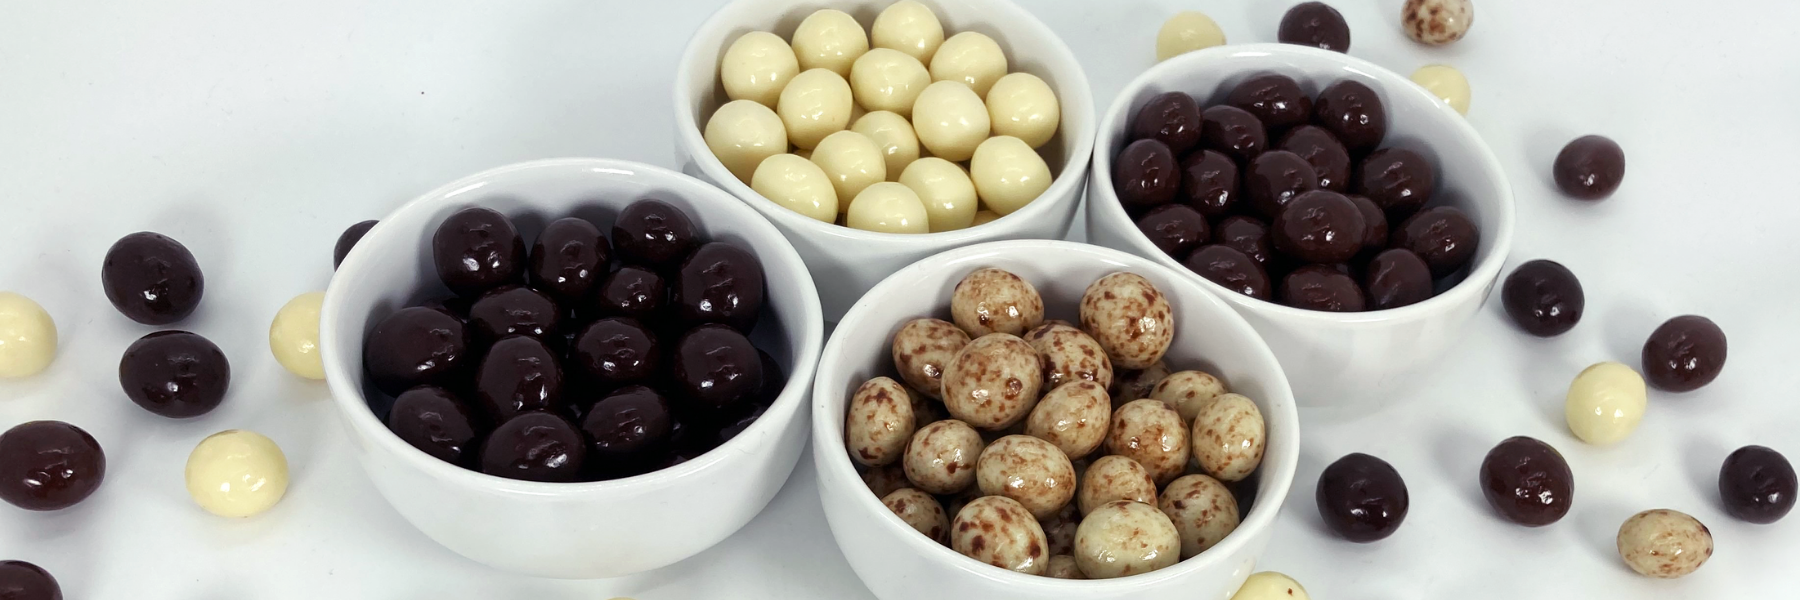 Dilettante Chocolates Chocolate-Covered Espresso Beans featuring milk, white, dark, and marbled chocolate flavors